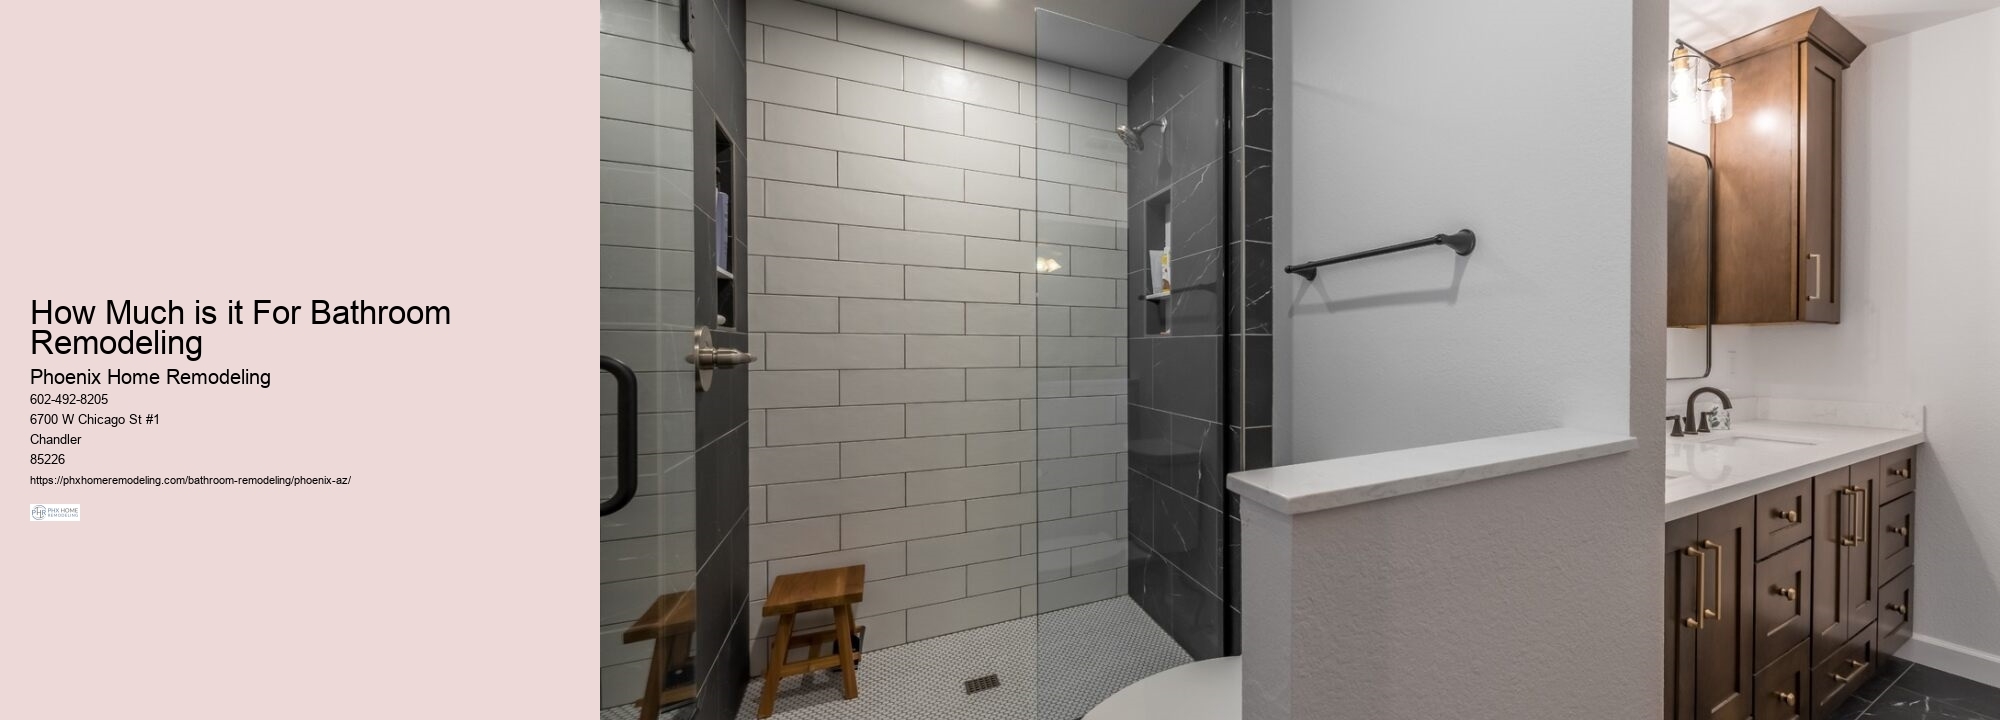 What is the difference between a bathroom renovation and remodel